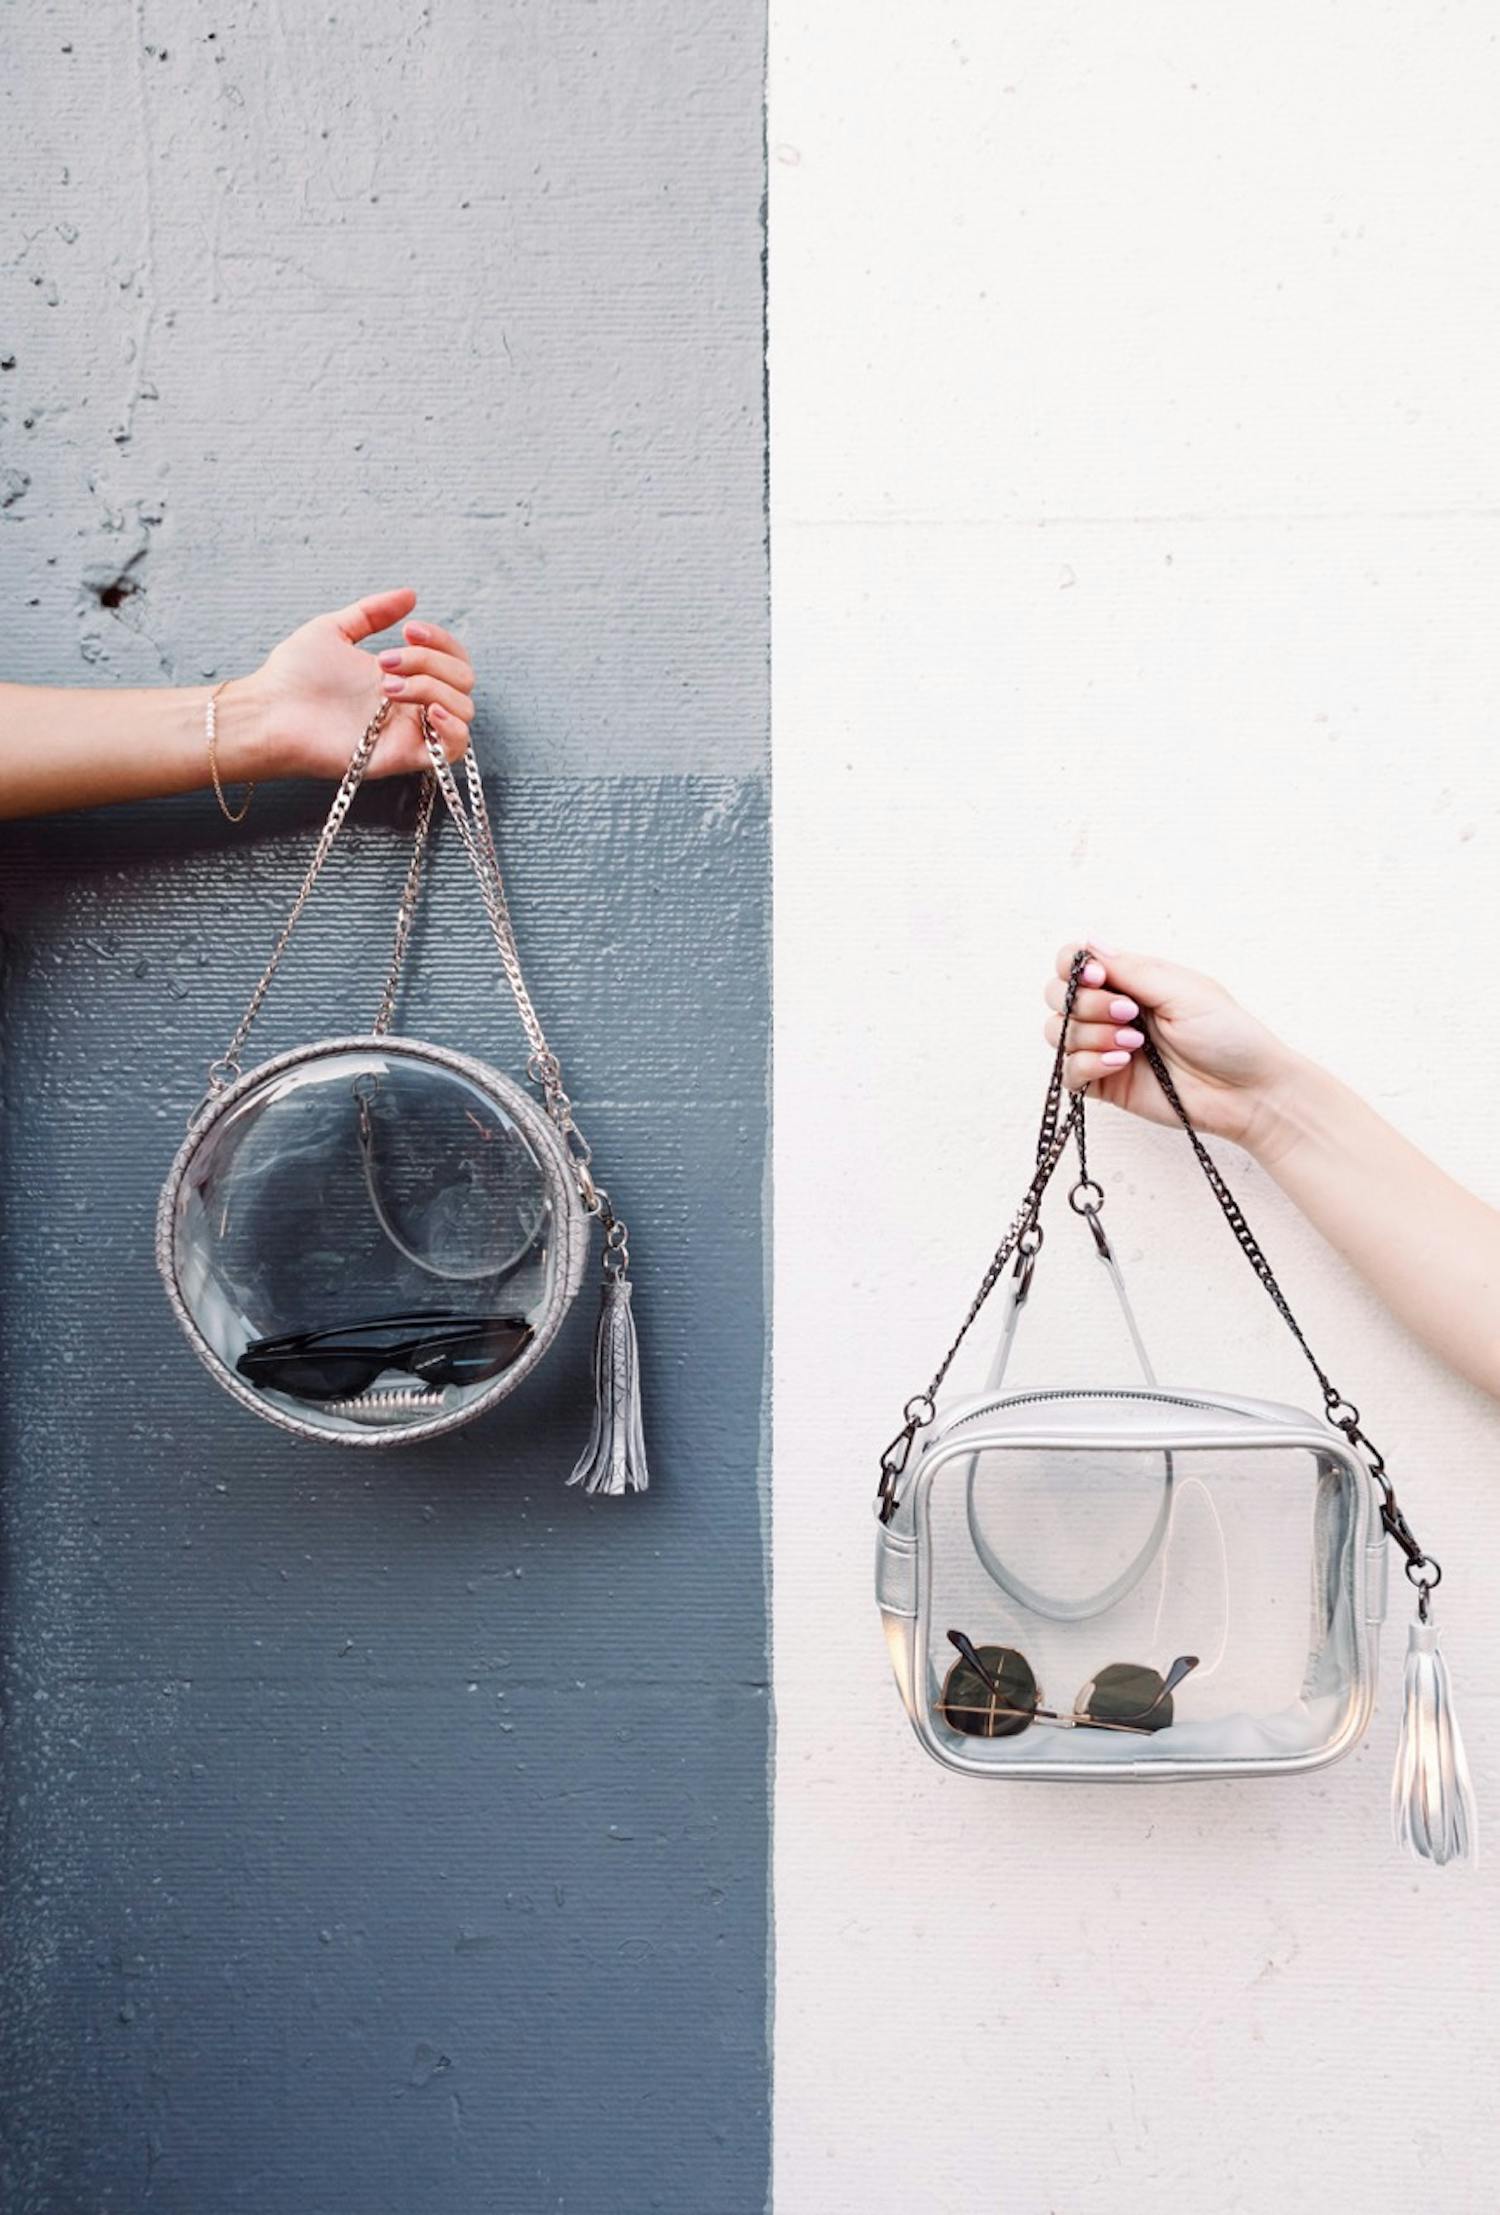 The Roxy and Stella style bags from Clarity Handbags. The site offers four styles for around $50 a bag.